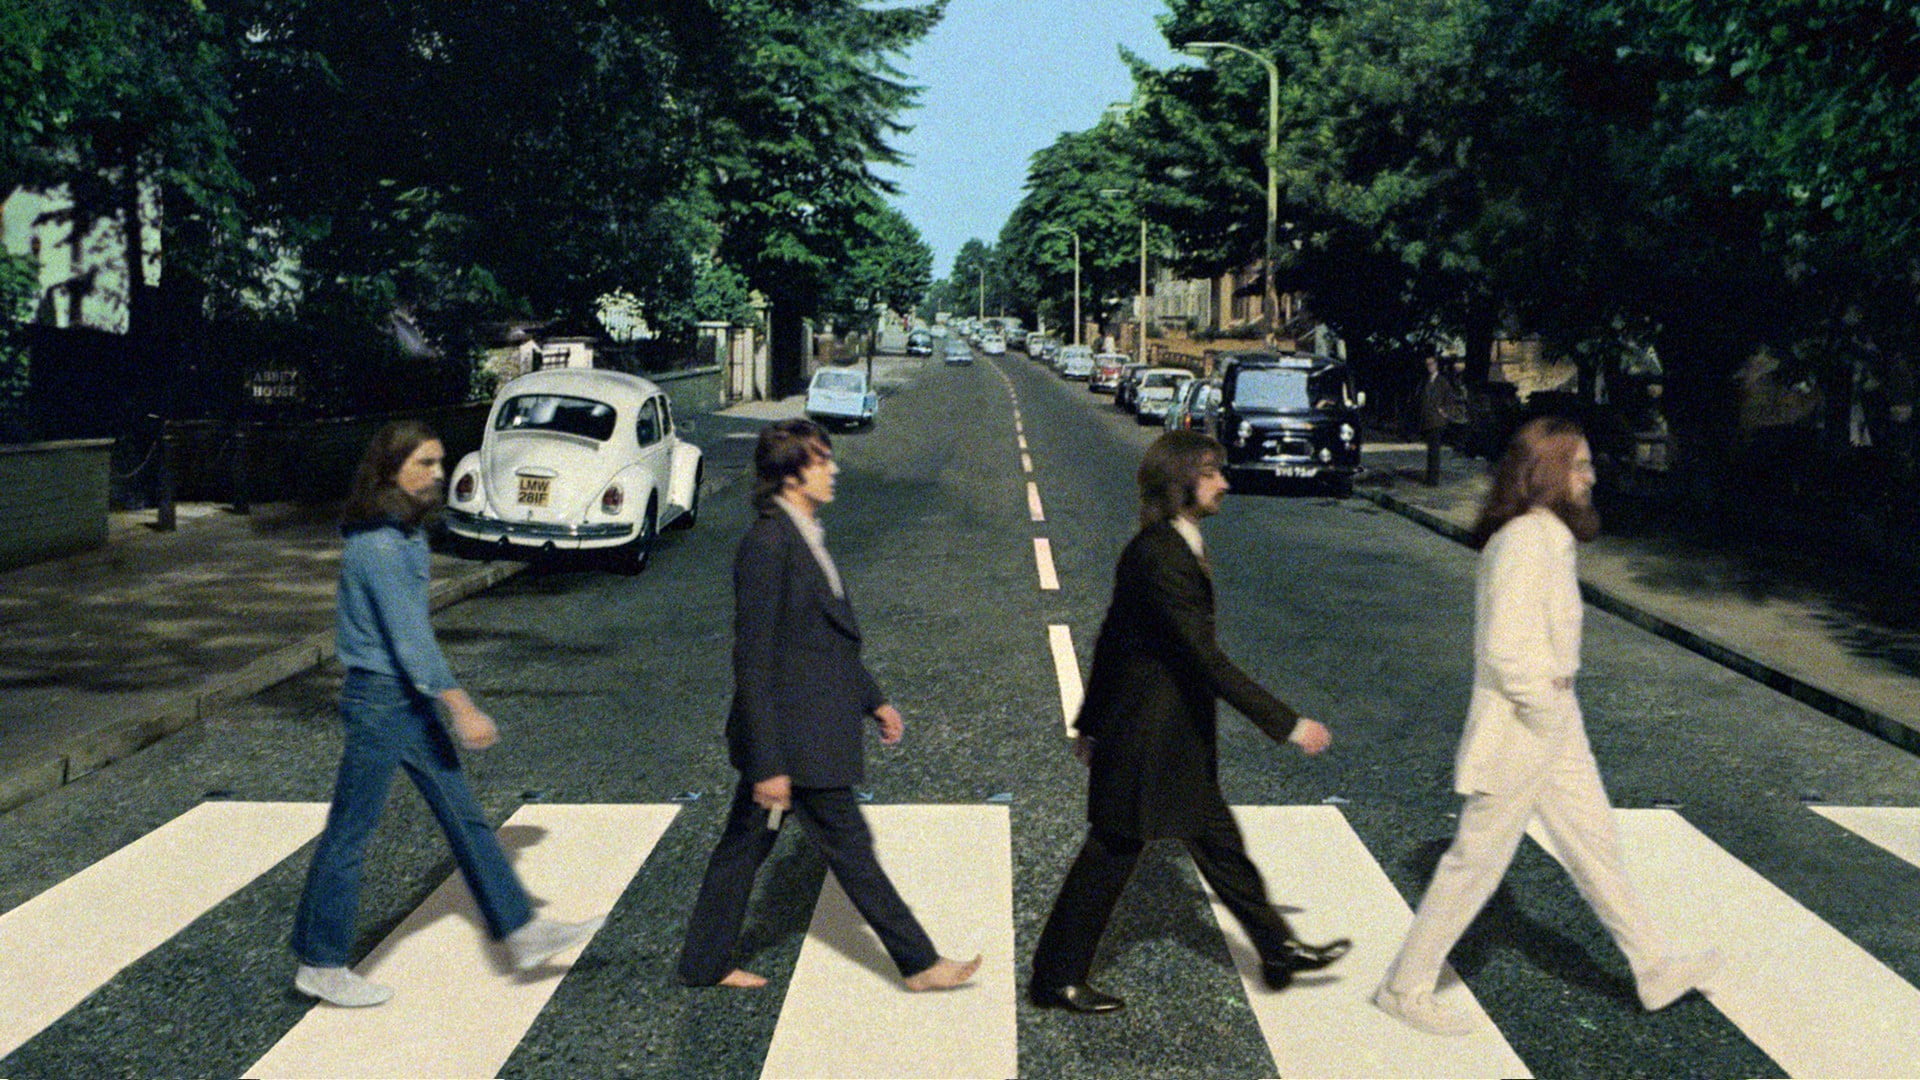 The Beatles Band in Abby Road, music, album covers, The Beatles, Abbey Road